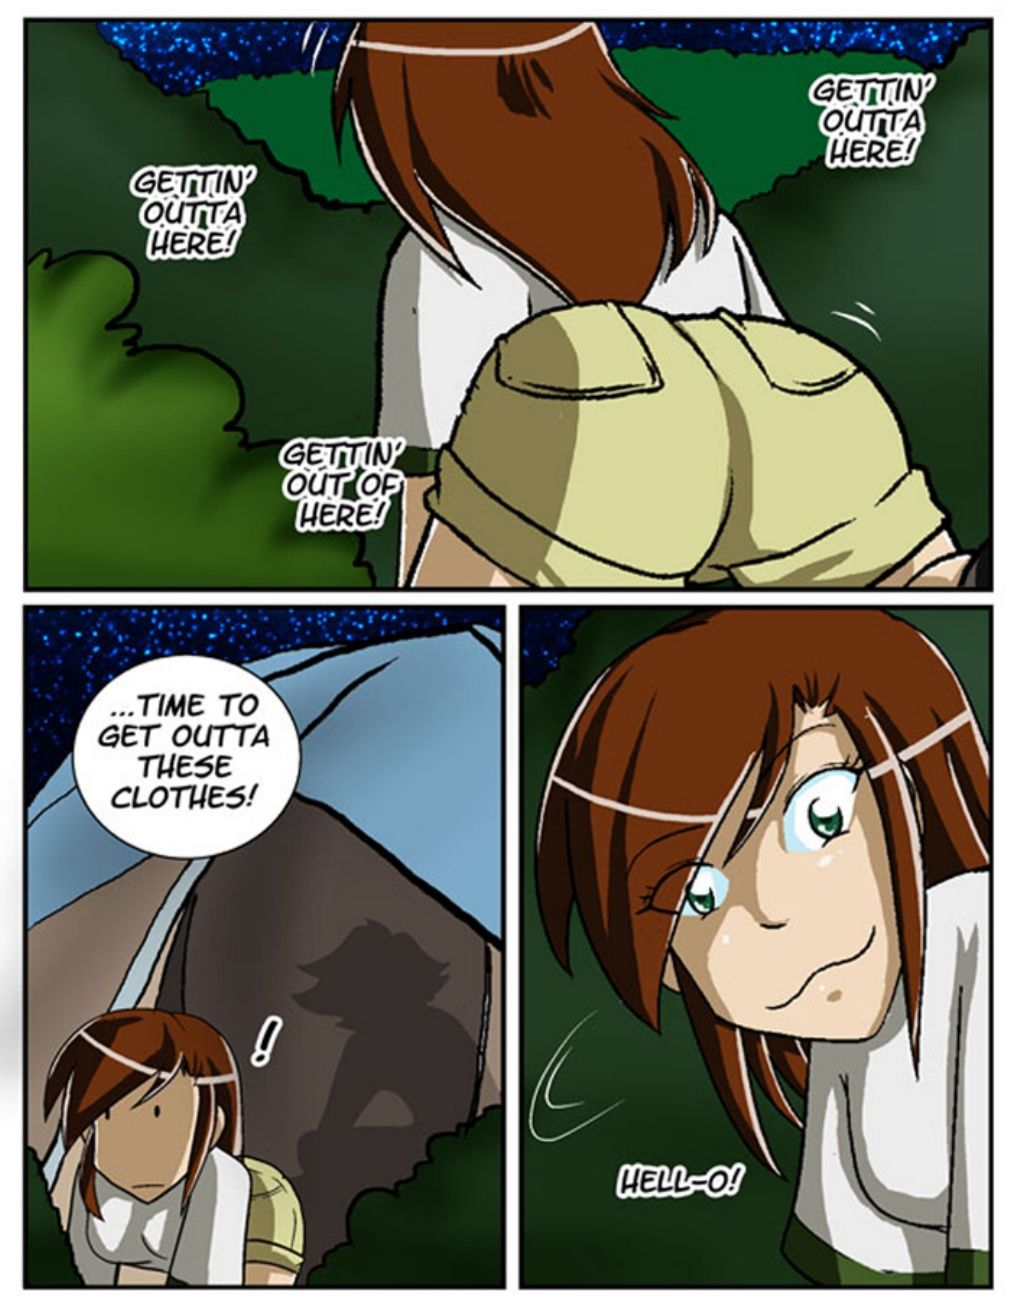 A Date With A Tentacle Monster 6 - Tentacle Summer Camp Part 1 page 21